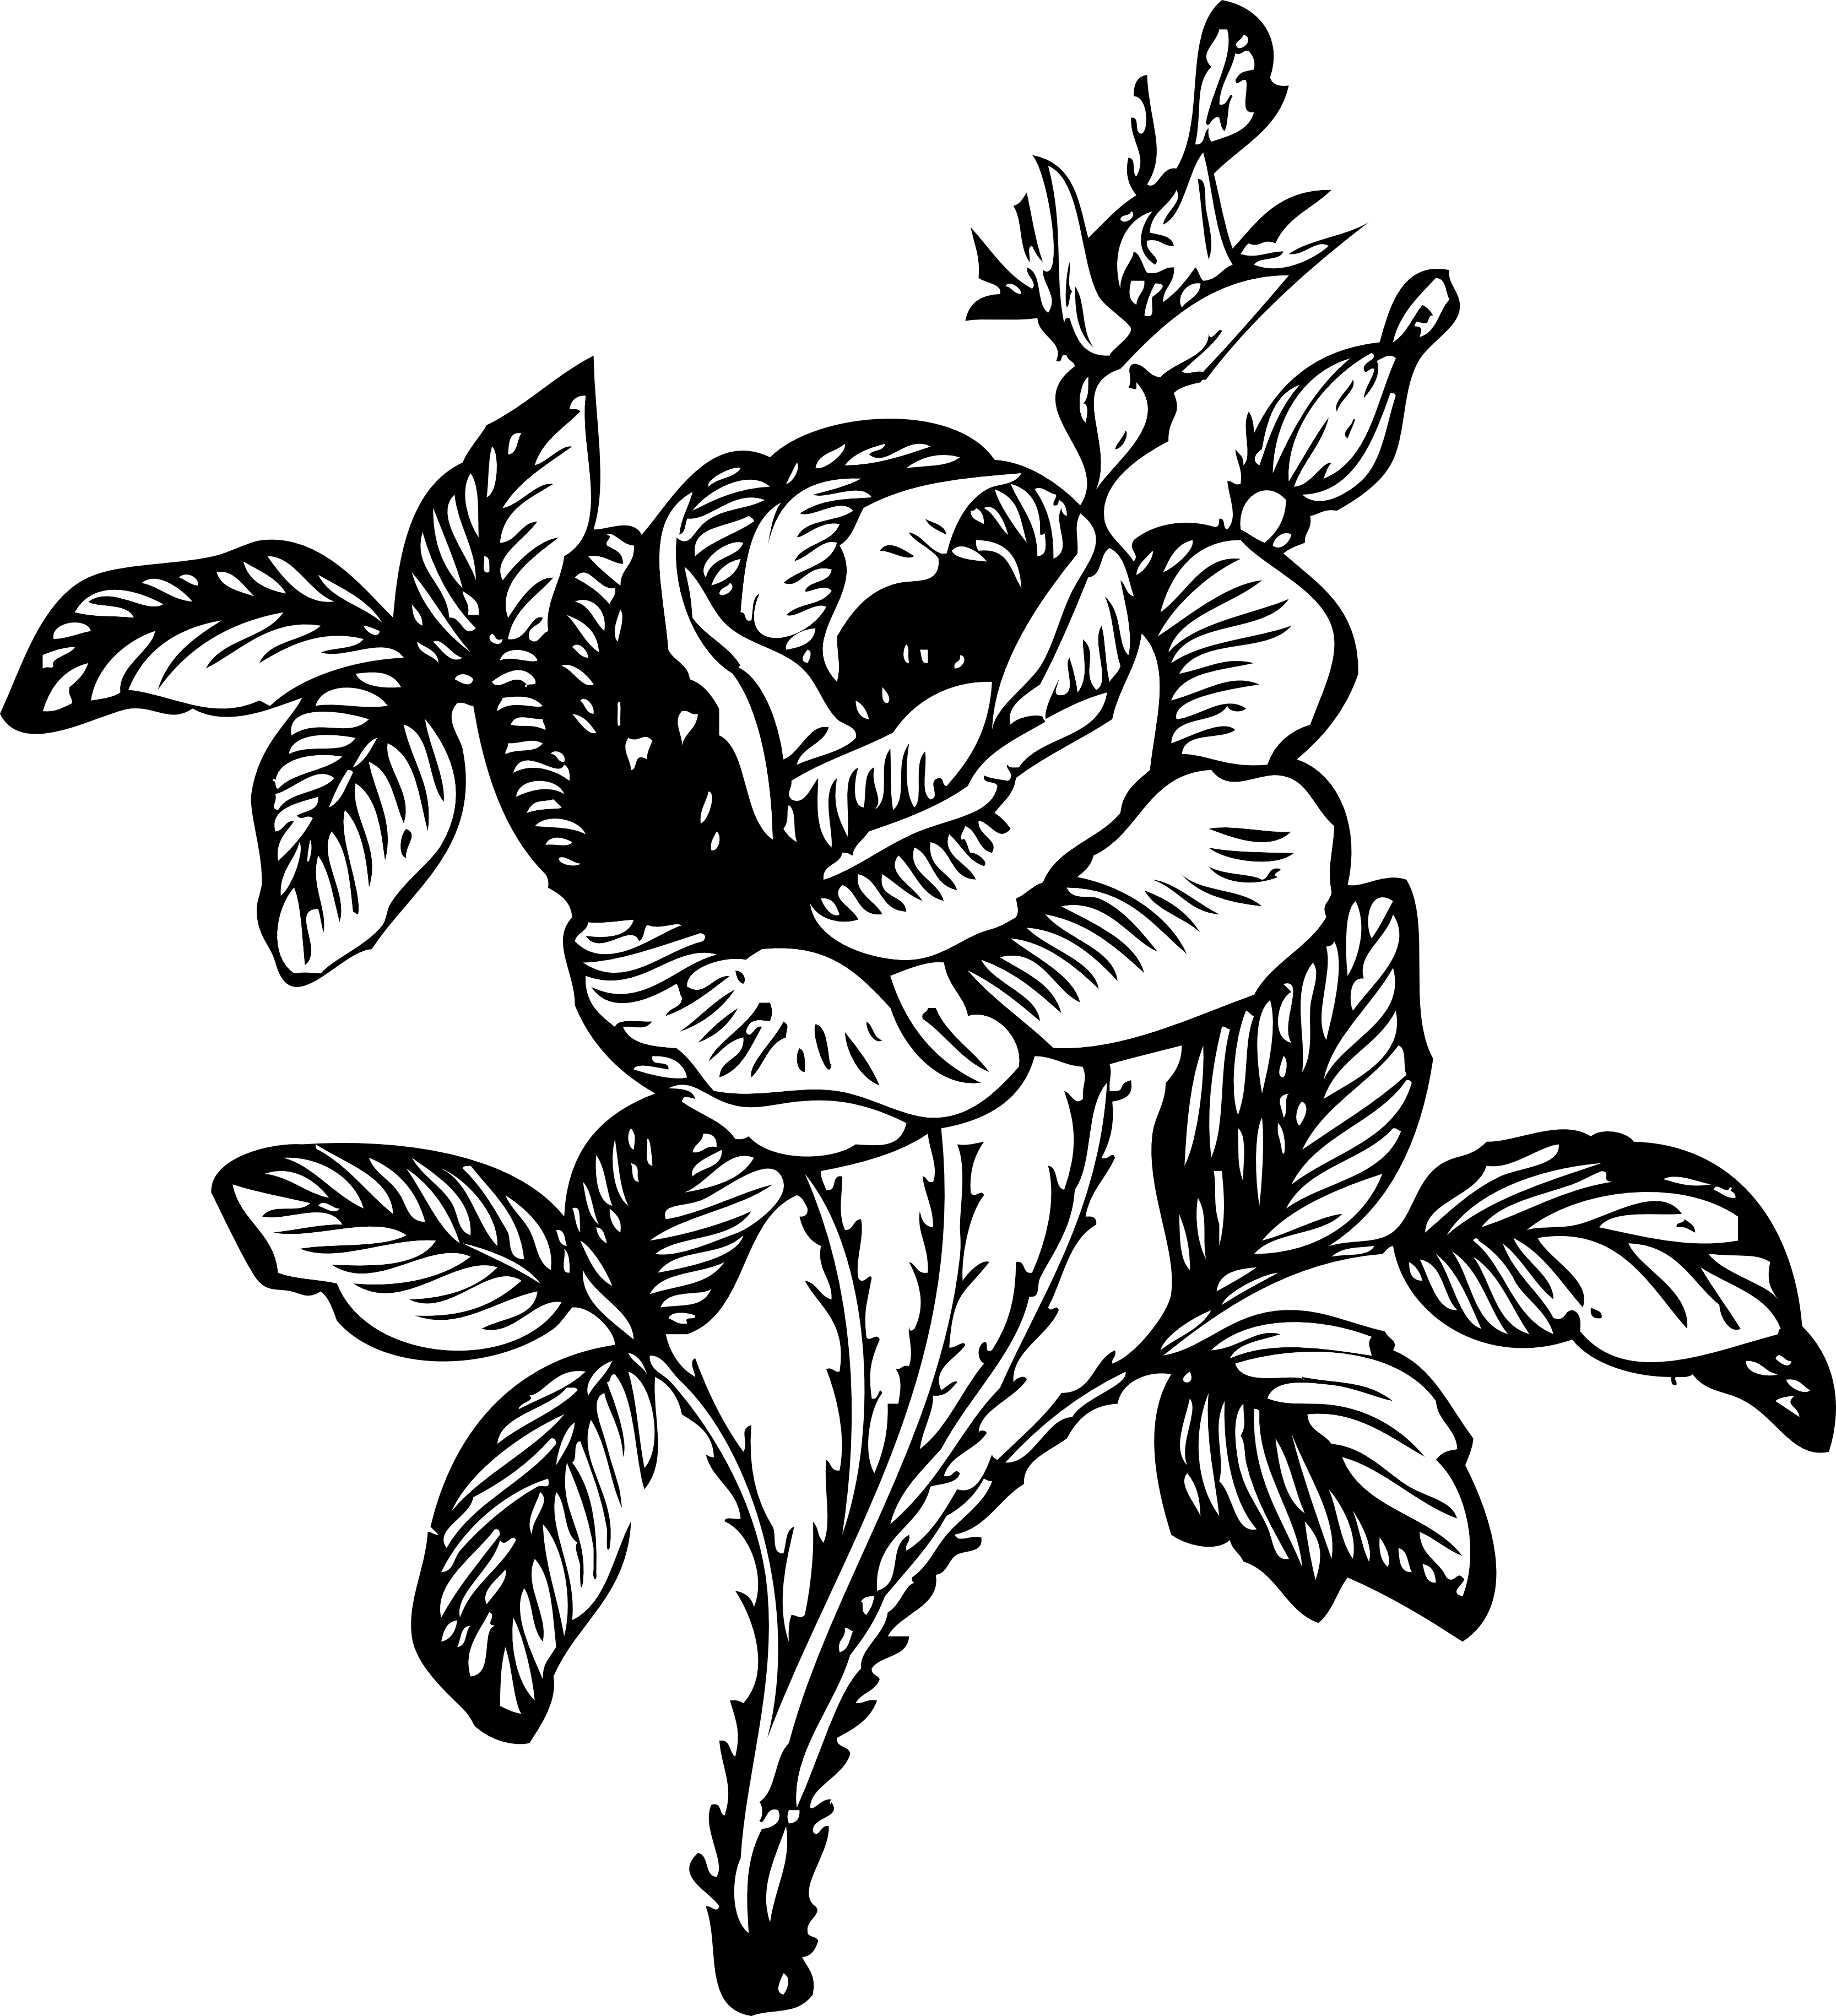 Rose 2 Black White Line Art Coloring Book Colouring ... - Simple Black and White Rose